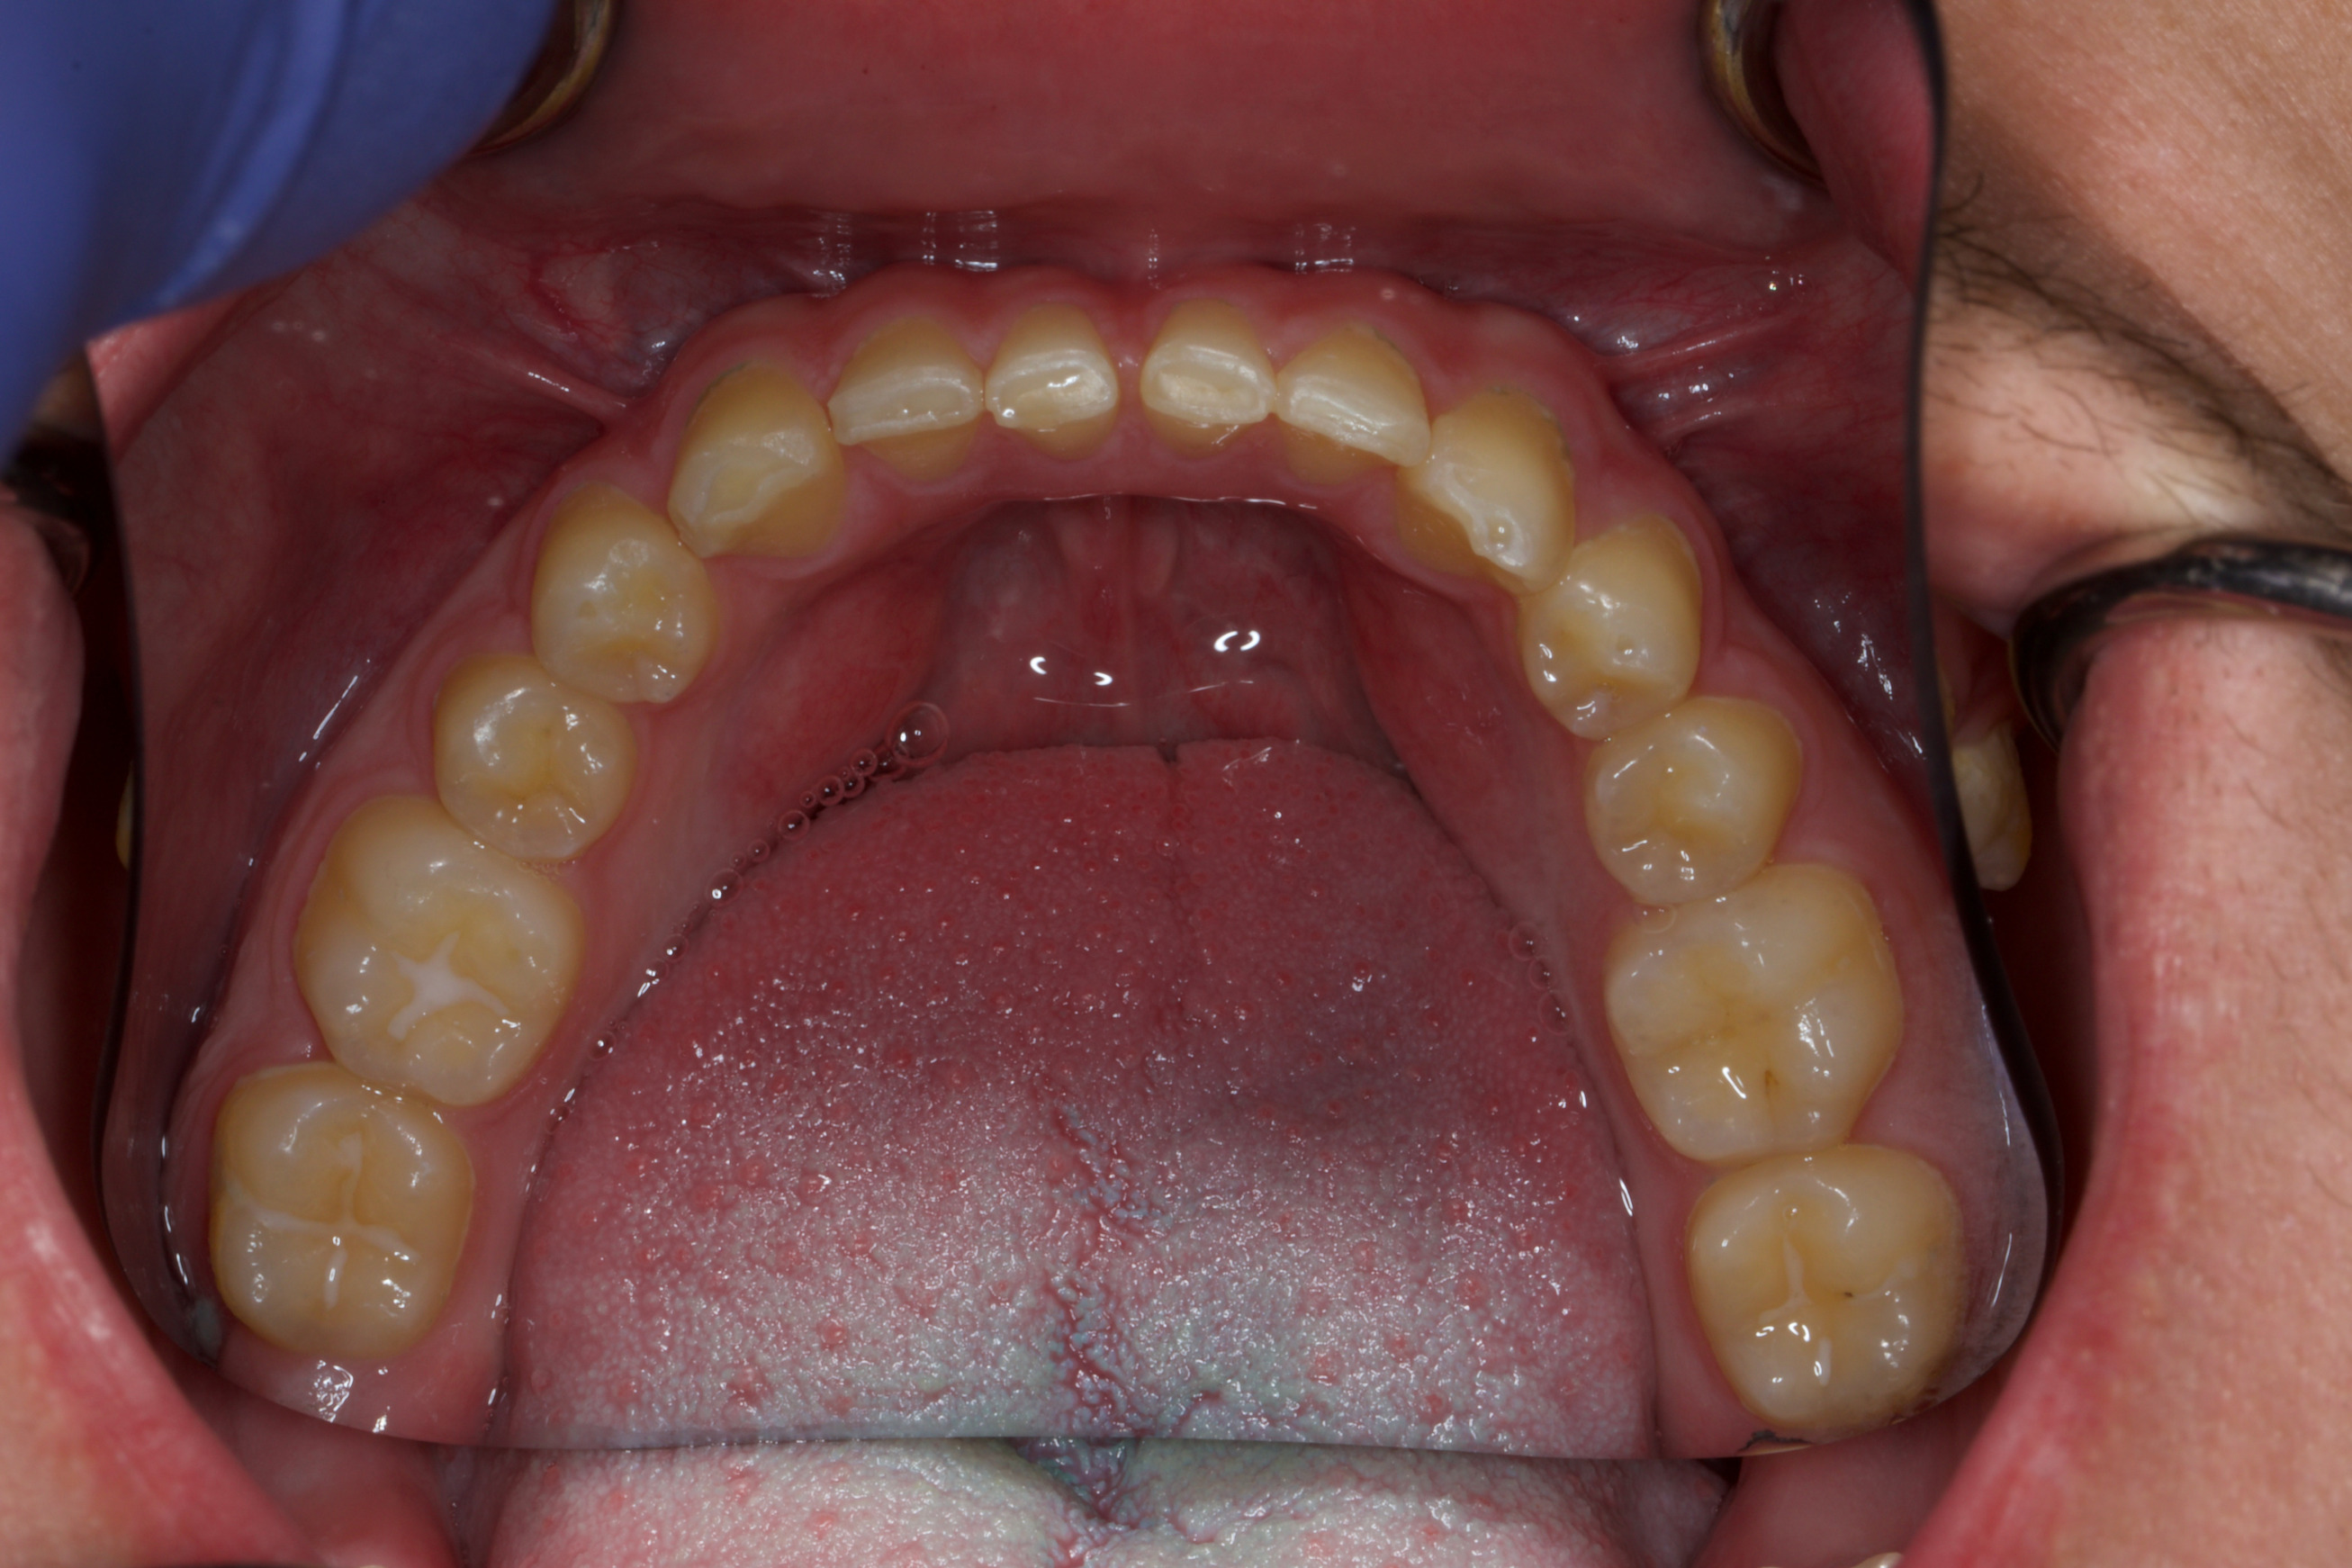 Fig. 4: Intra-oral photograph of the mandibular arch.